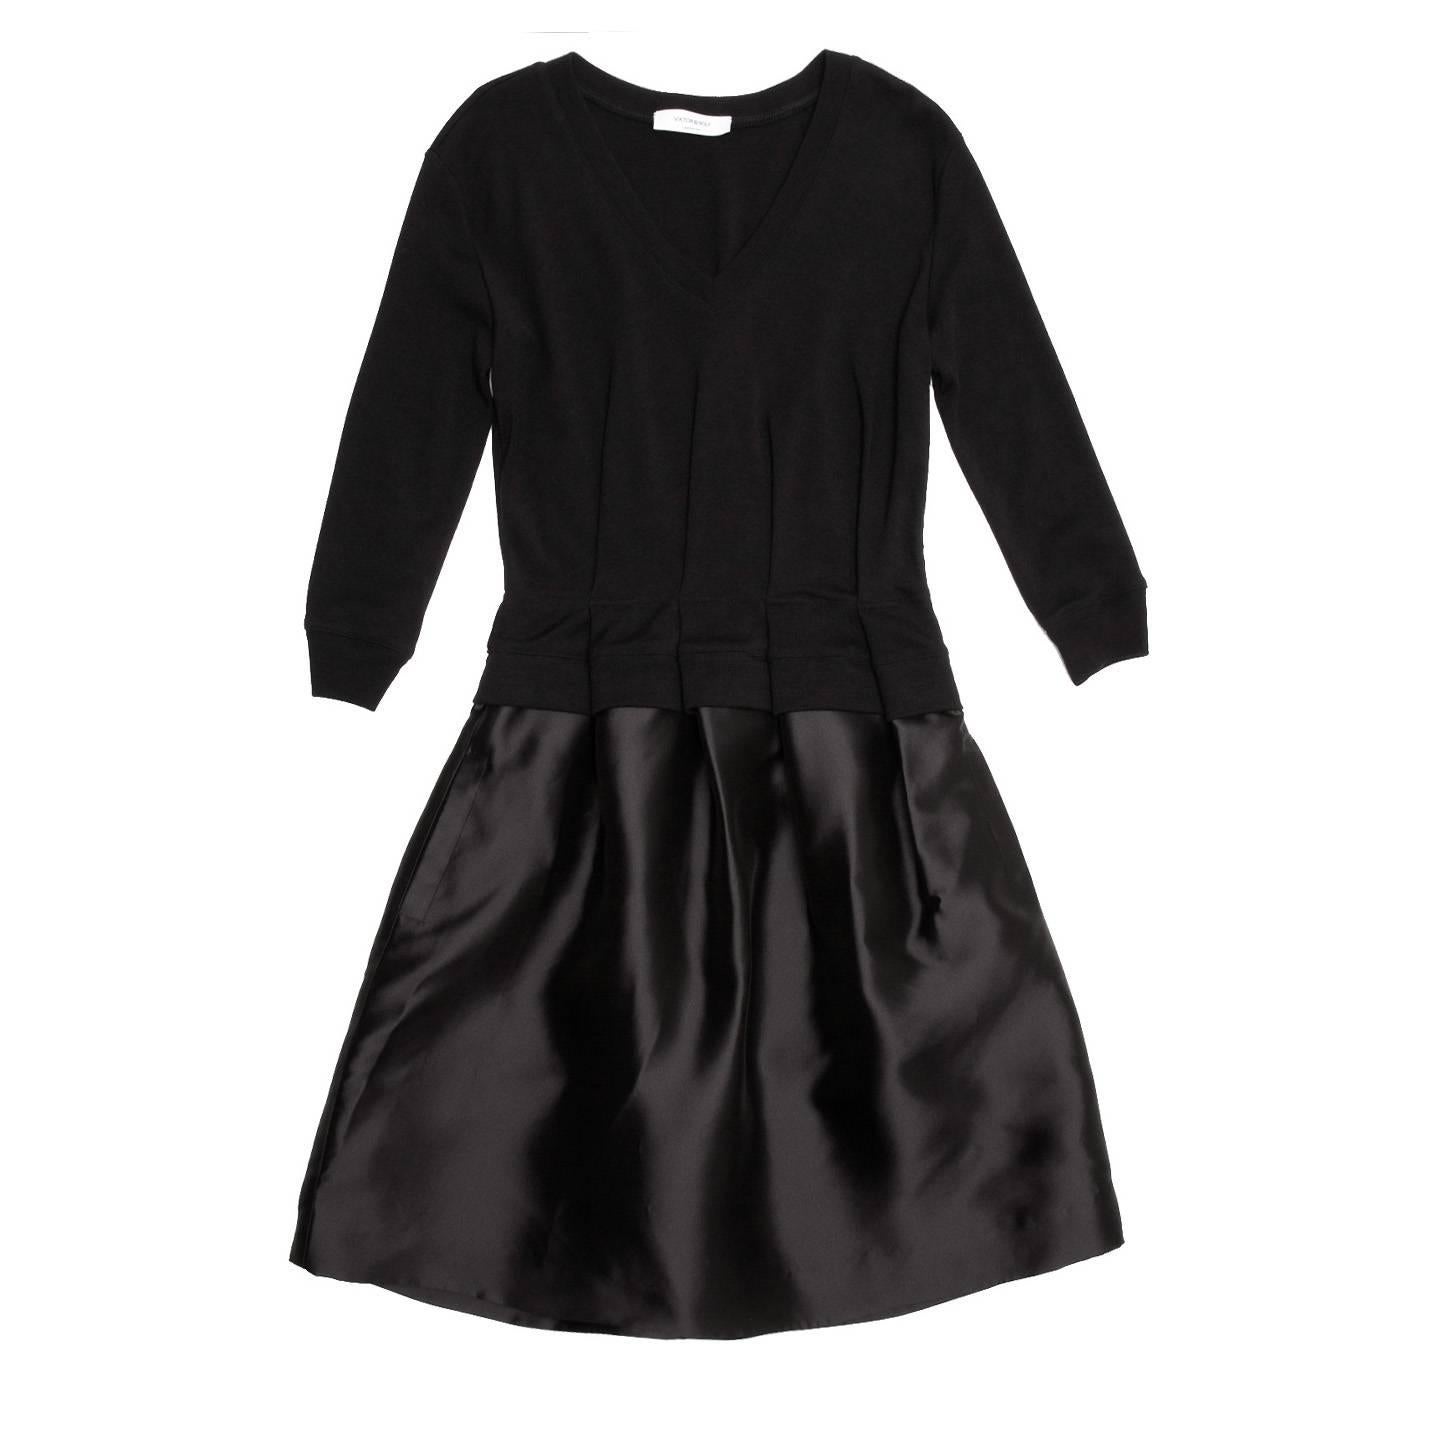 Black flare cocktail dress with fleece top and soft taffeta skirt. At waist the top is folded and stitched together with the skirt creating a soft volume with deep pleats. The neck has a moderately deep V-shape and the sleeves are 3/4